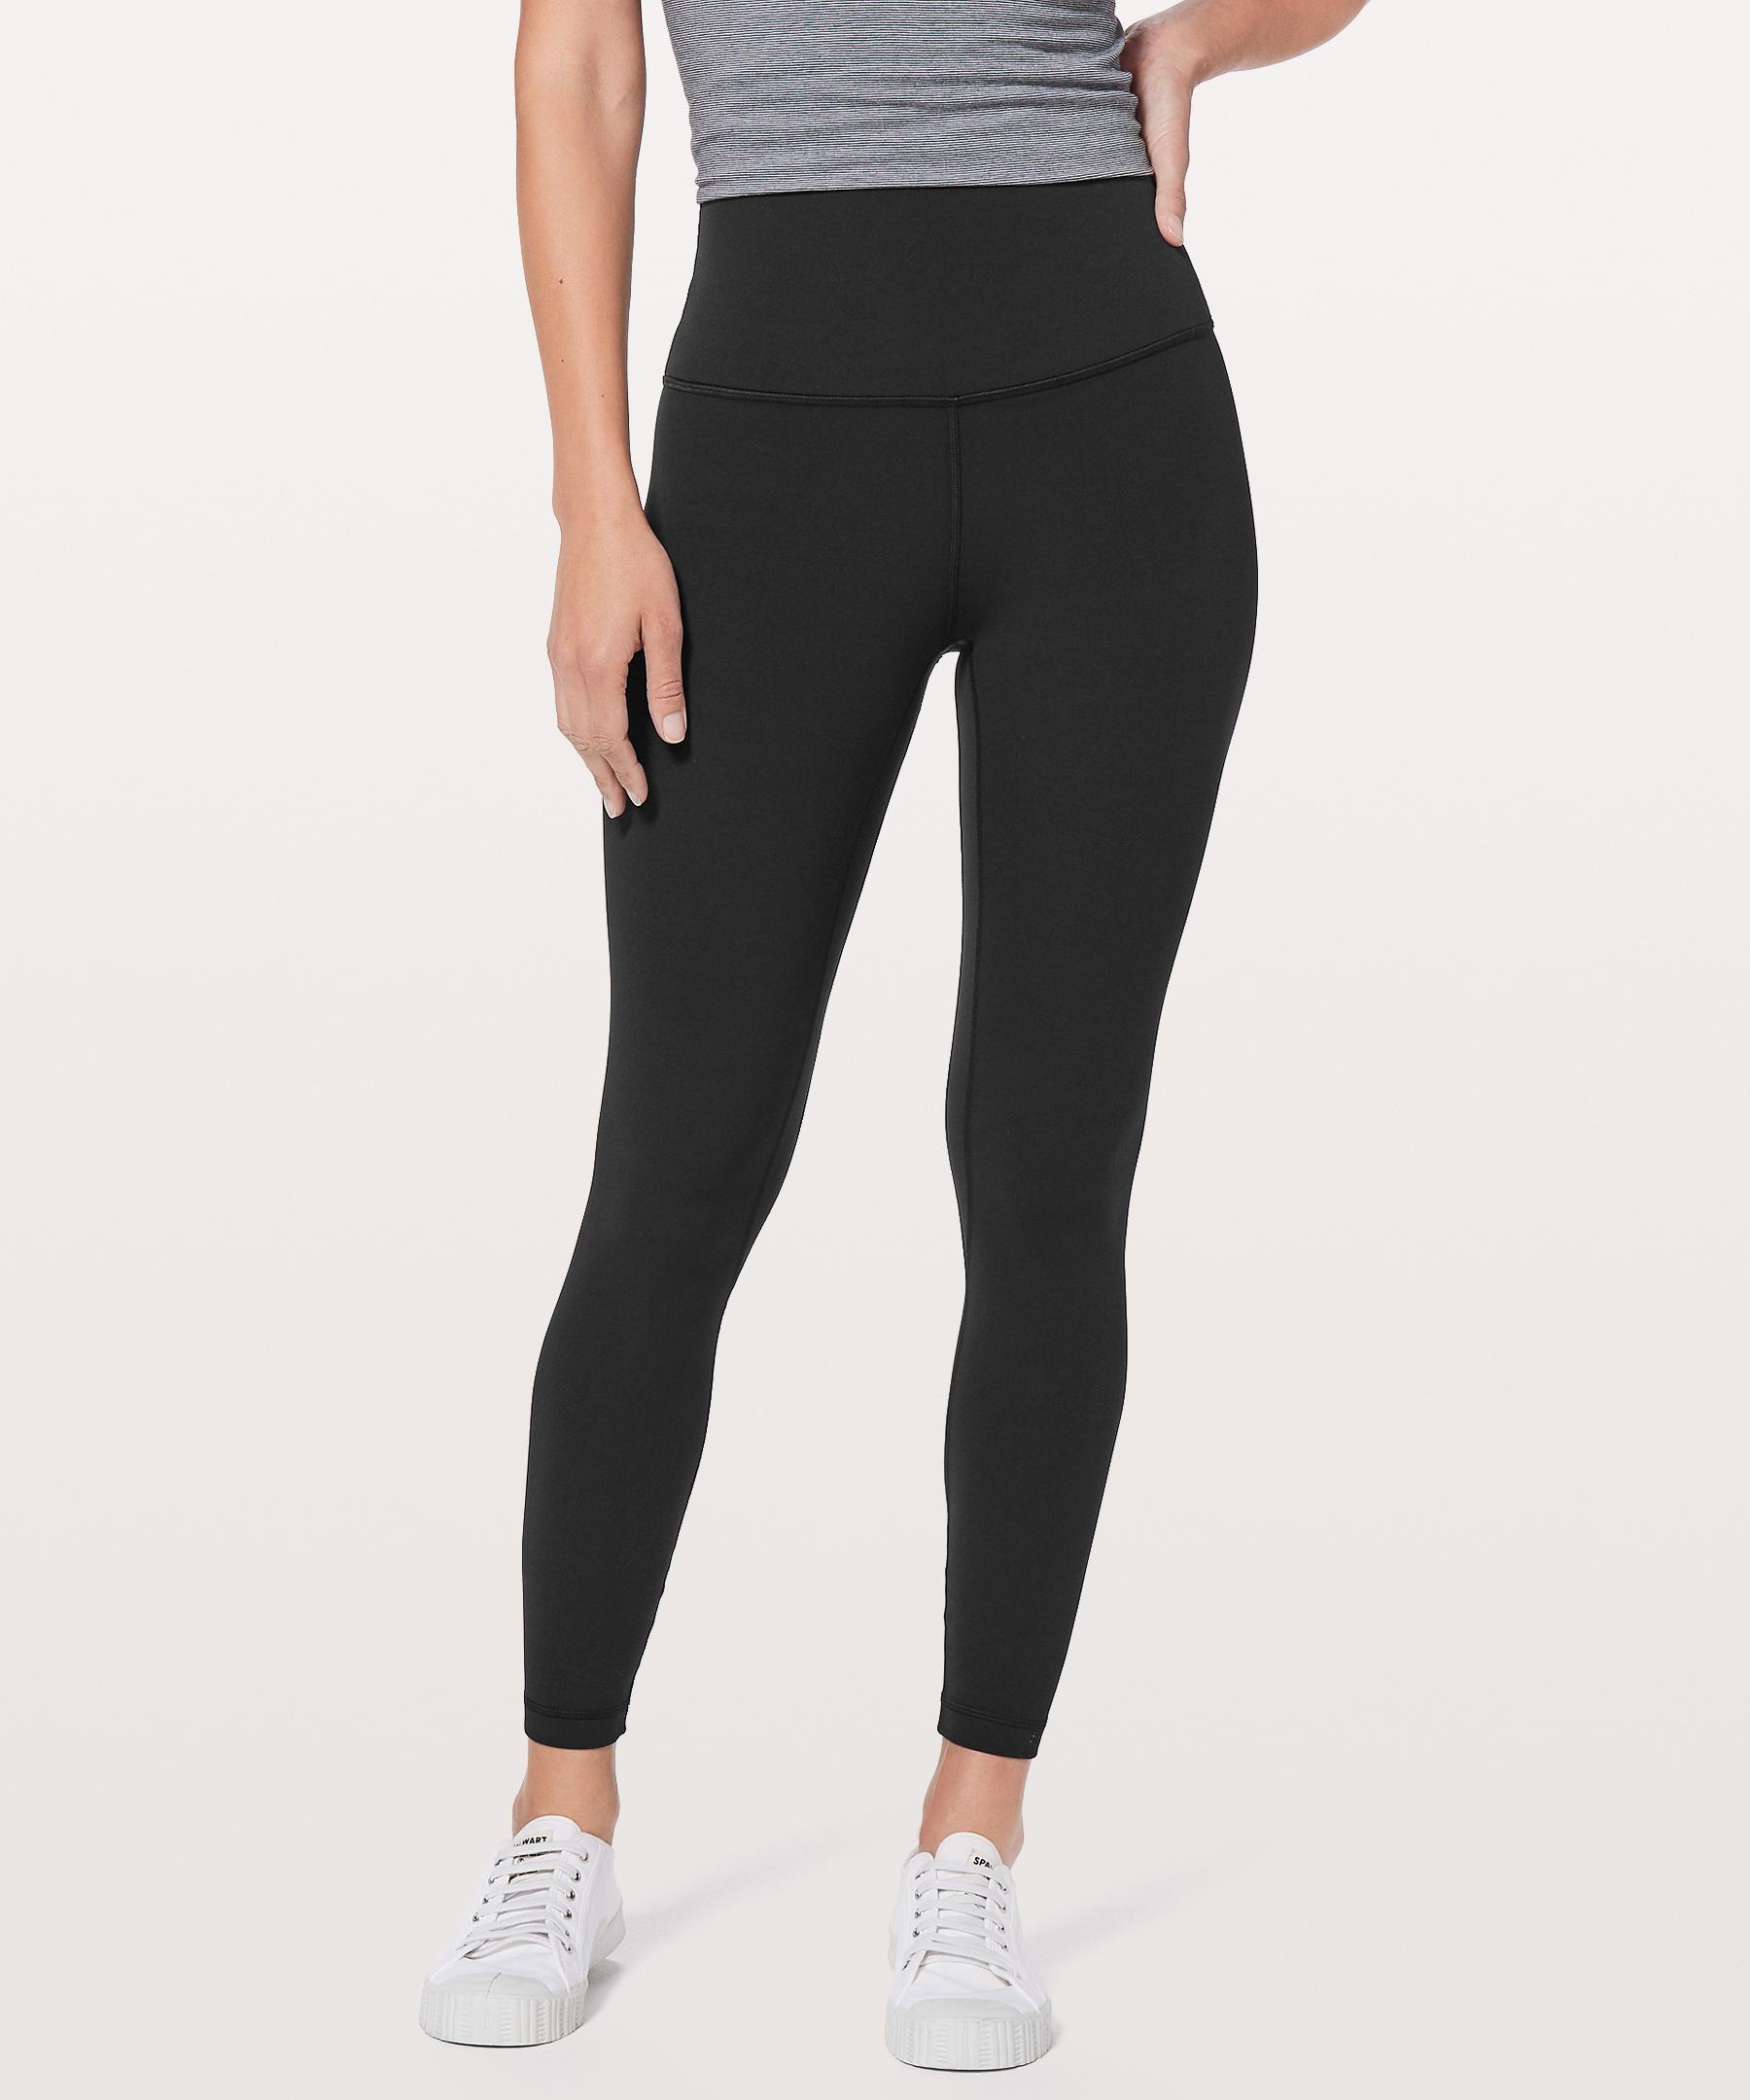 Best lululemon Leggings: Which Fabric Should You Choose - Living My Bex Life